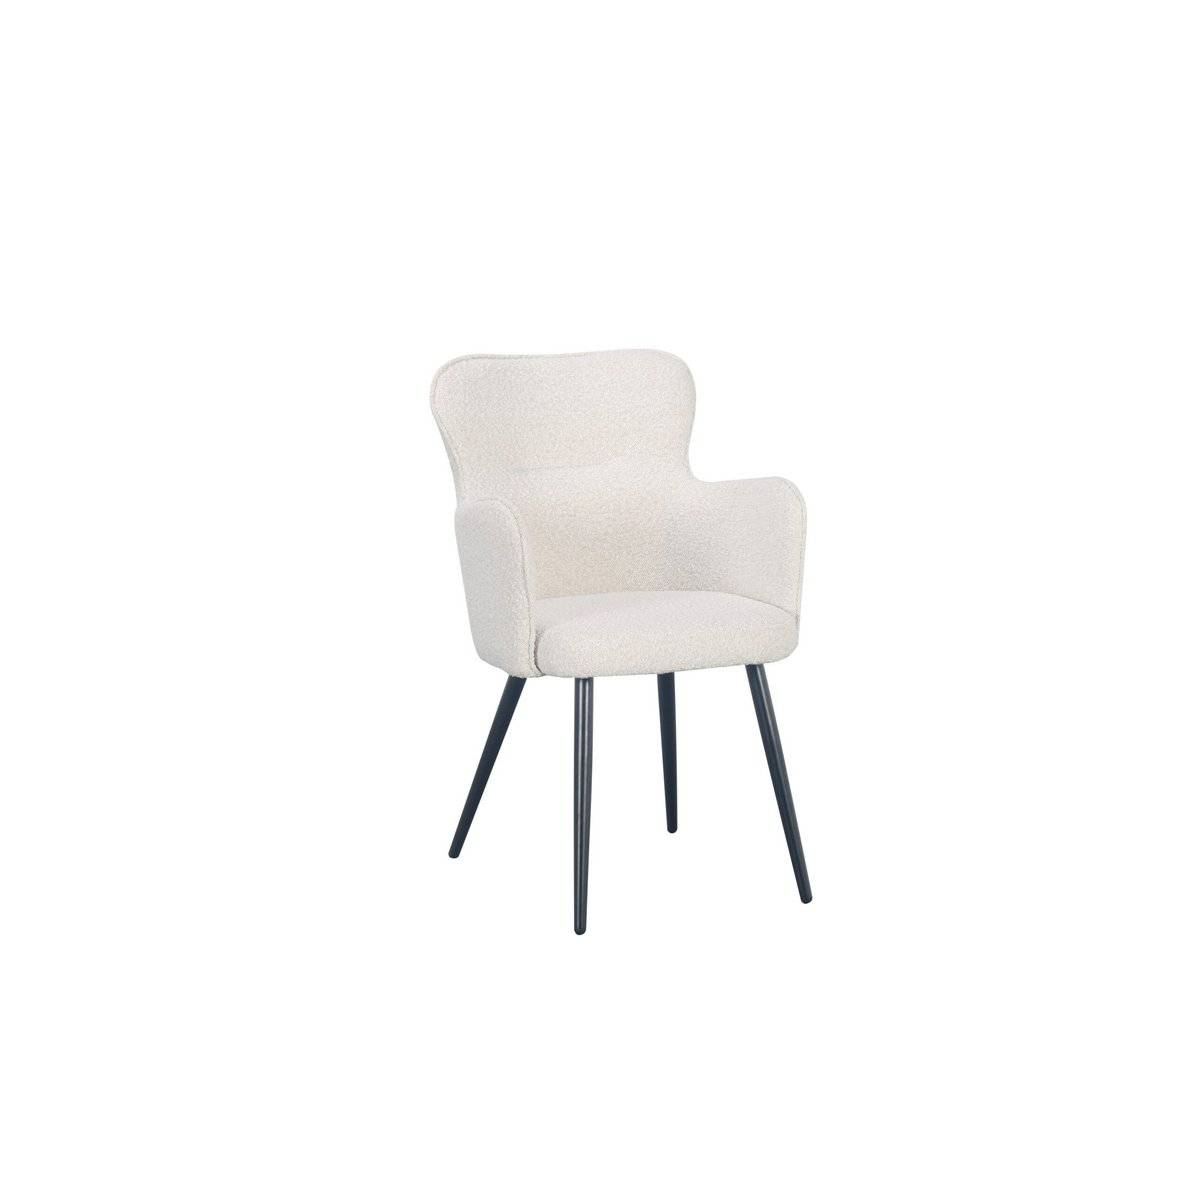 Wing chair pearl white (Set of 2)